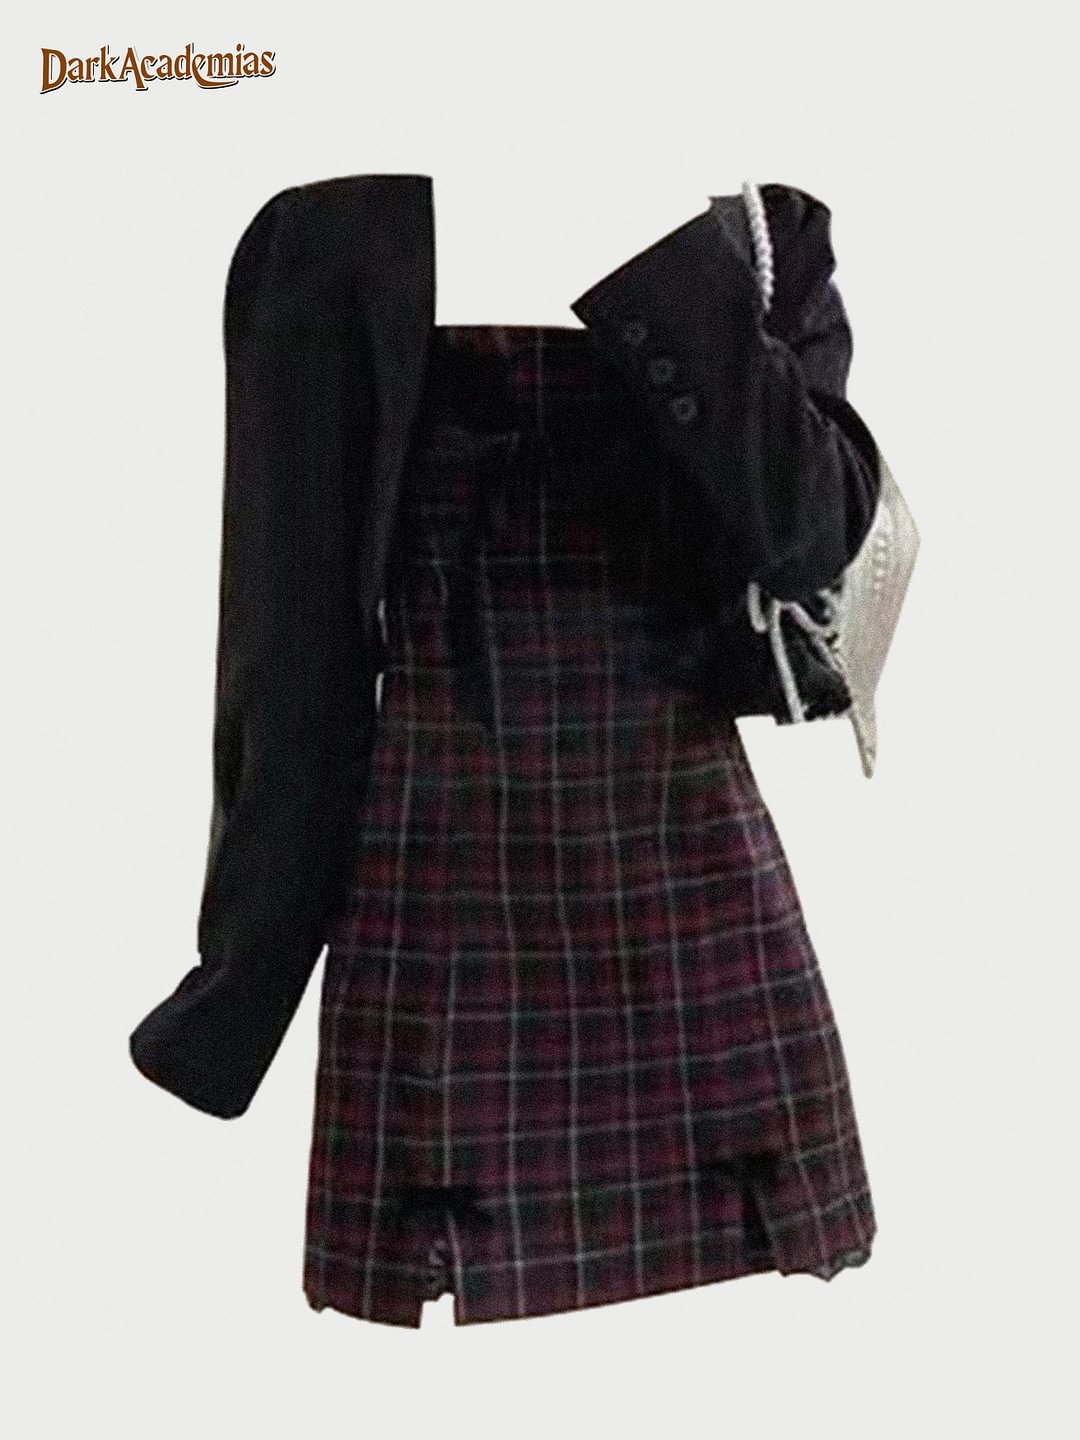 Darkacademias Plaid Skirt And Suit Two Piece